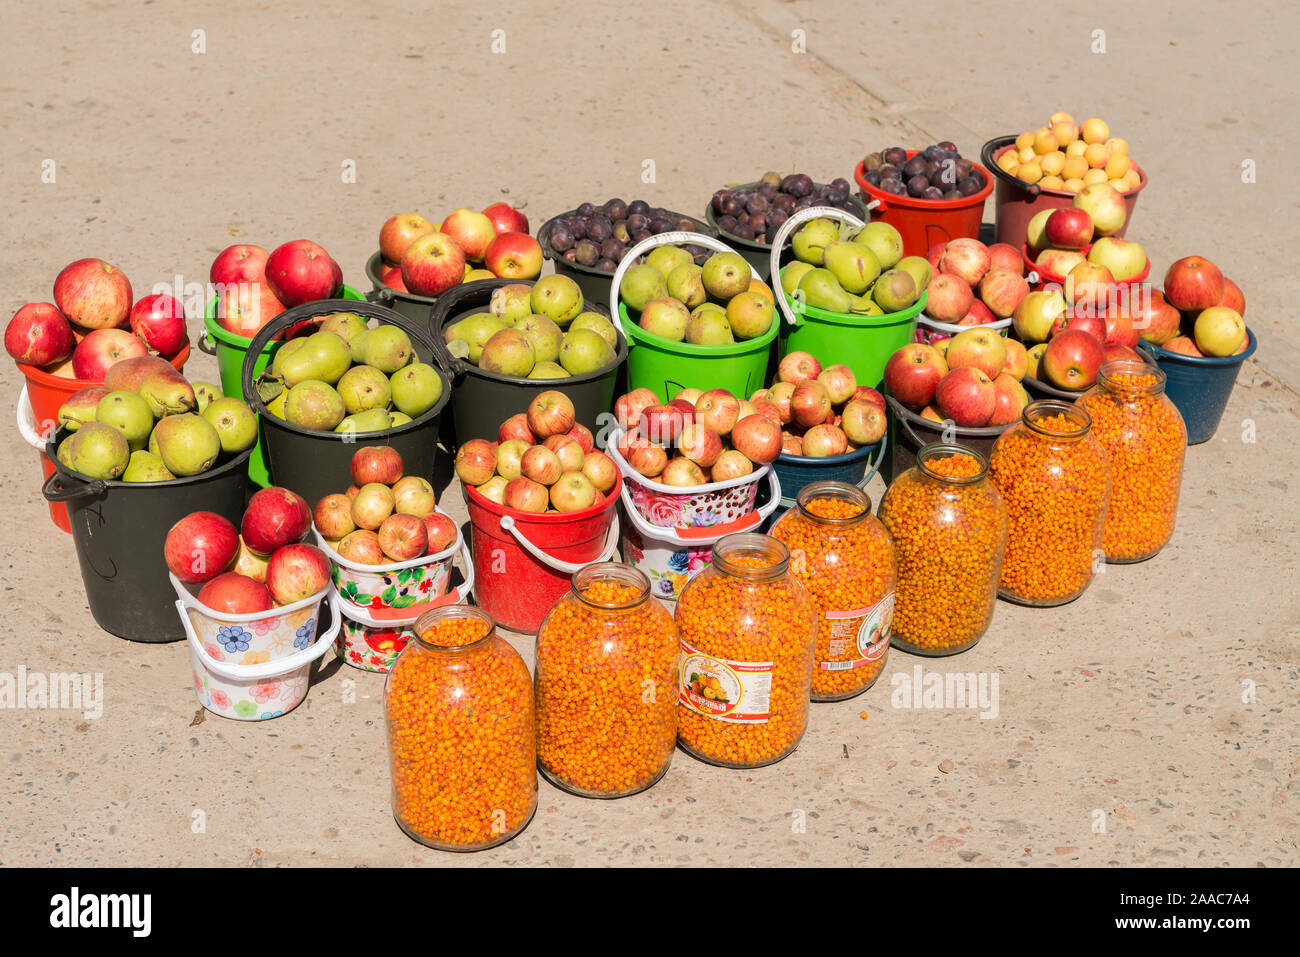 fruit and juice for sale, Kyrgyzstan Stock Photo